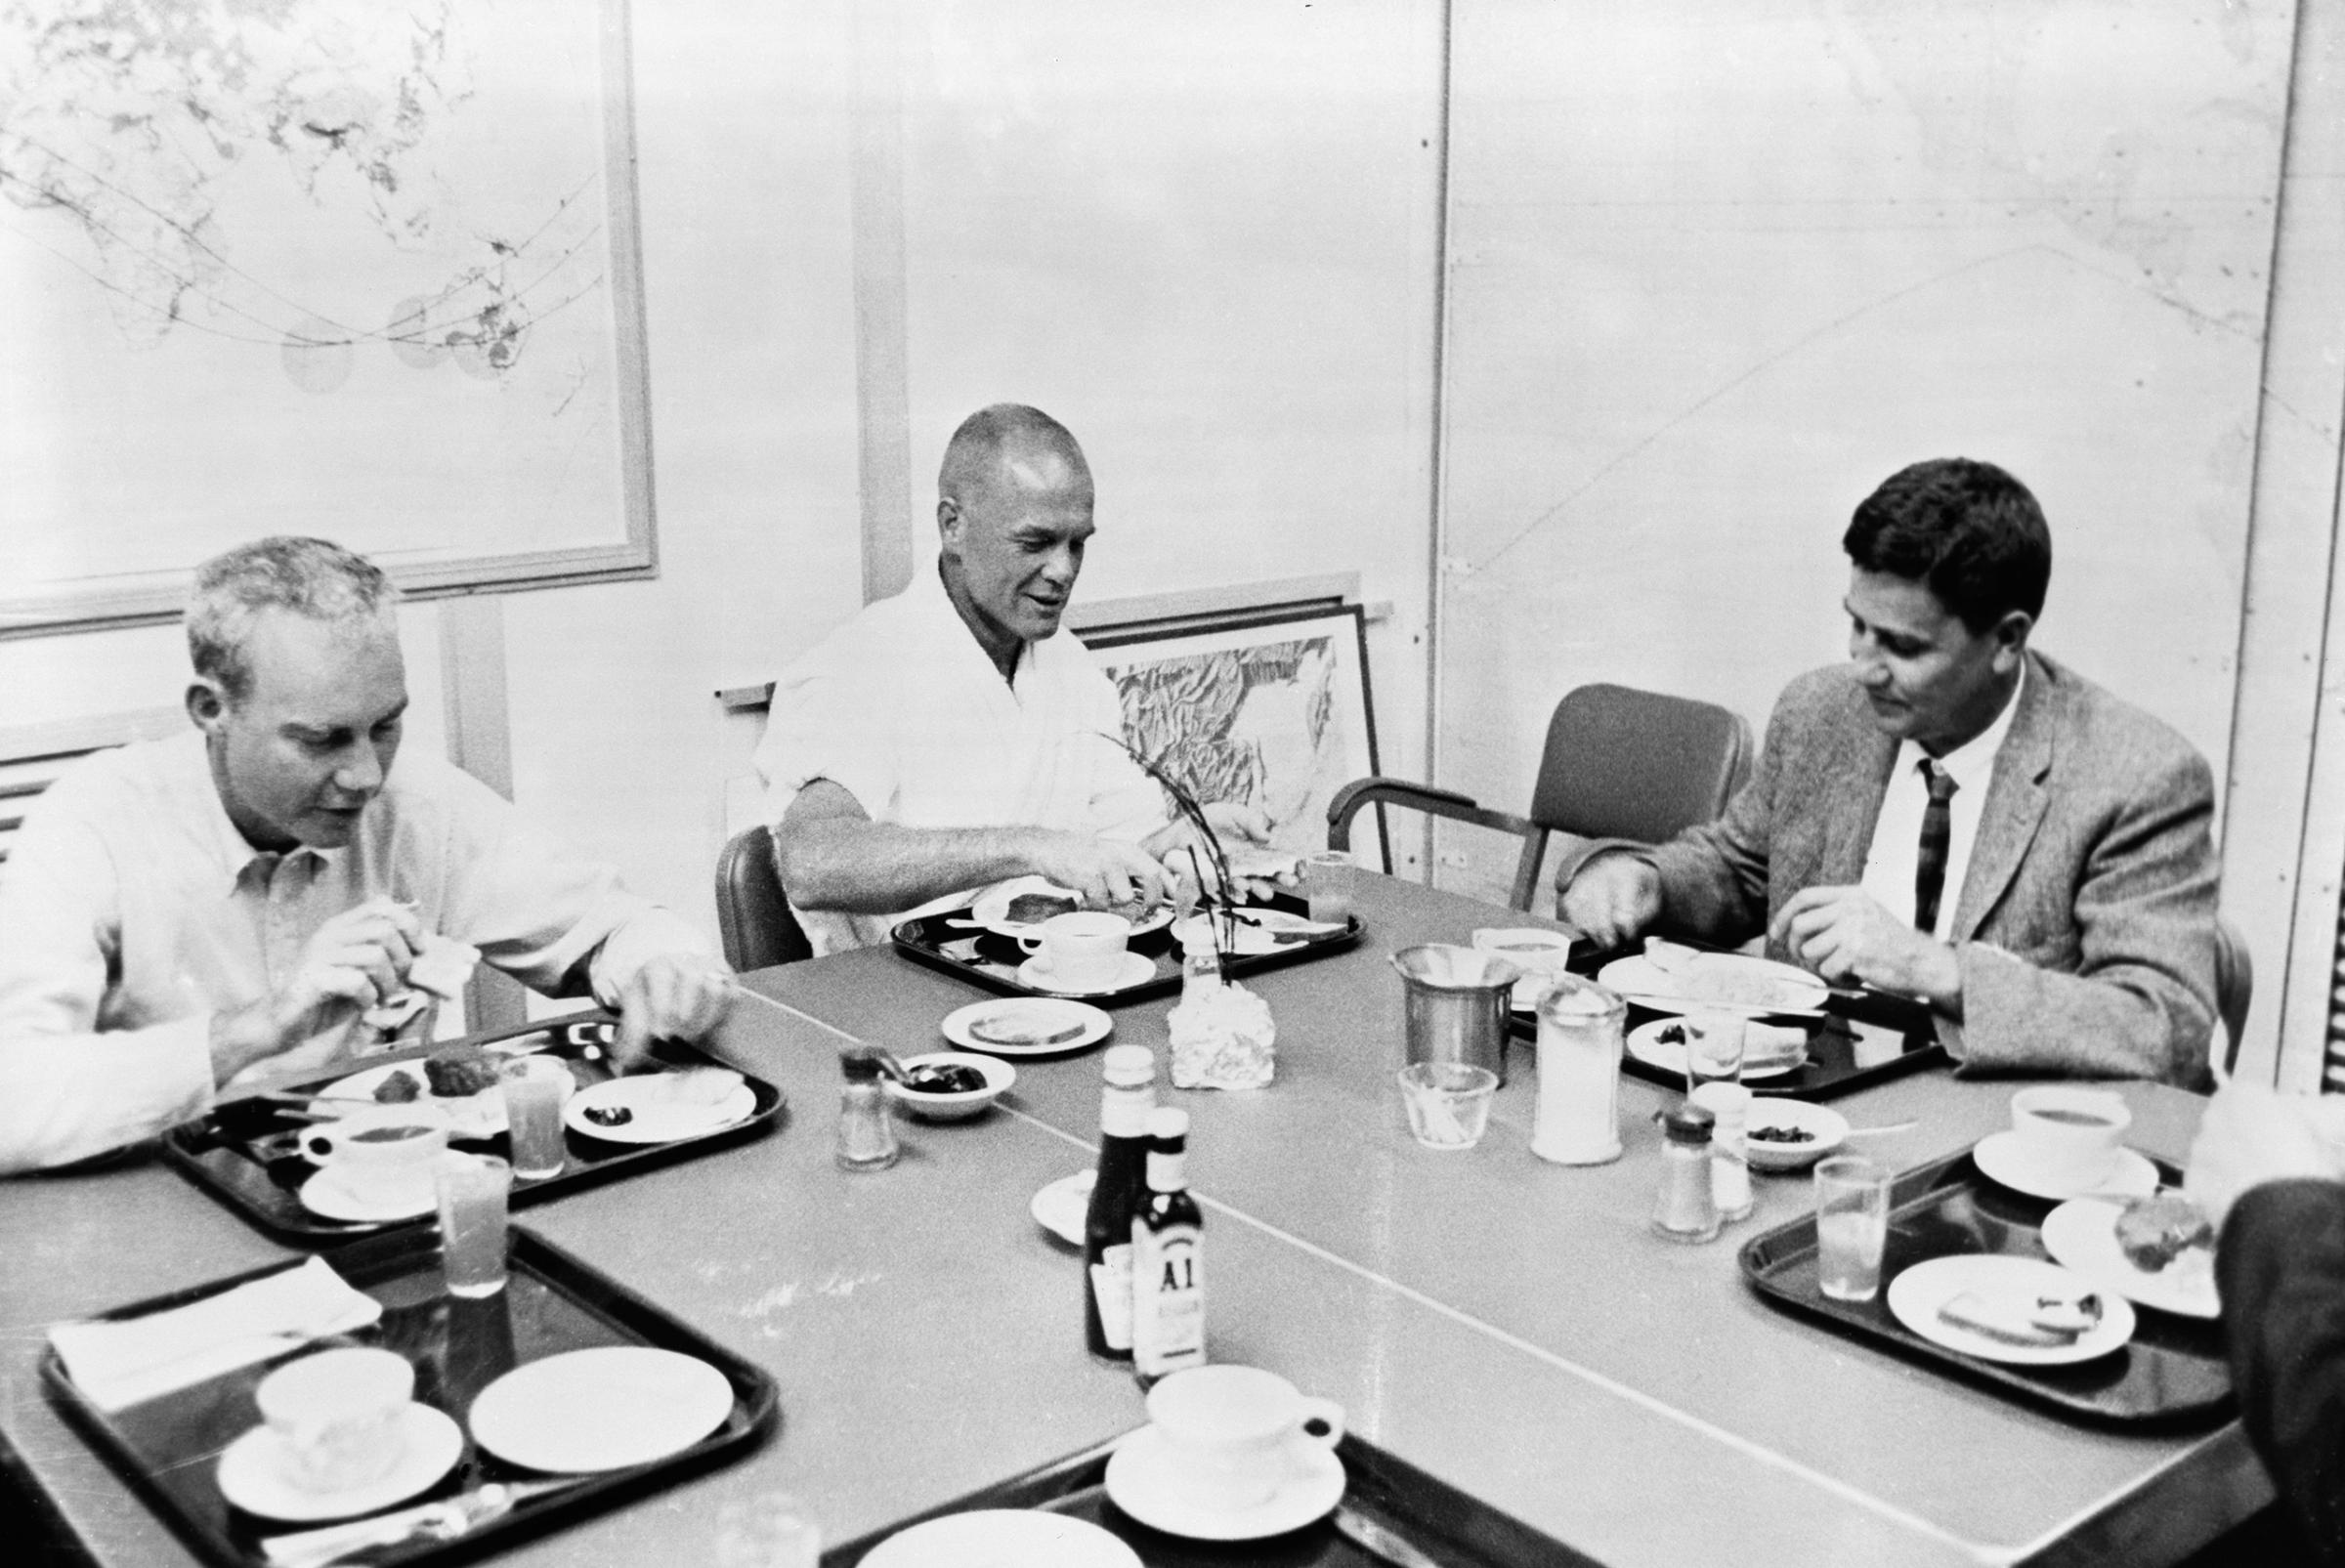 Food for Flight Glenn, center, has his prelaunch breakfast on Feb. 20, 1962, with two NASA officials. The traditional meal — steak, eggs, toast, coffee and juice — was a surprisingly heavy one for a man about to experience the stomach-flipping phenomenon of zero g.